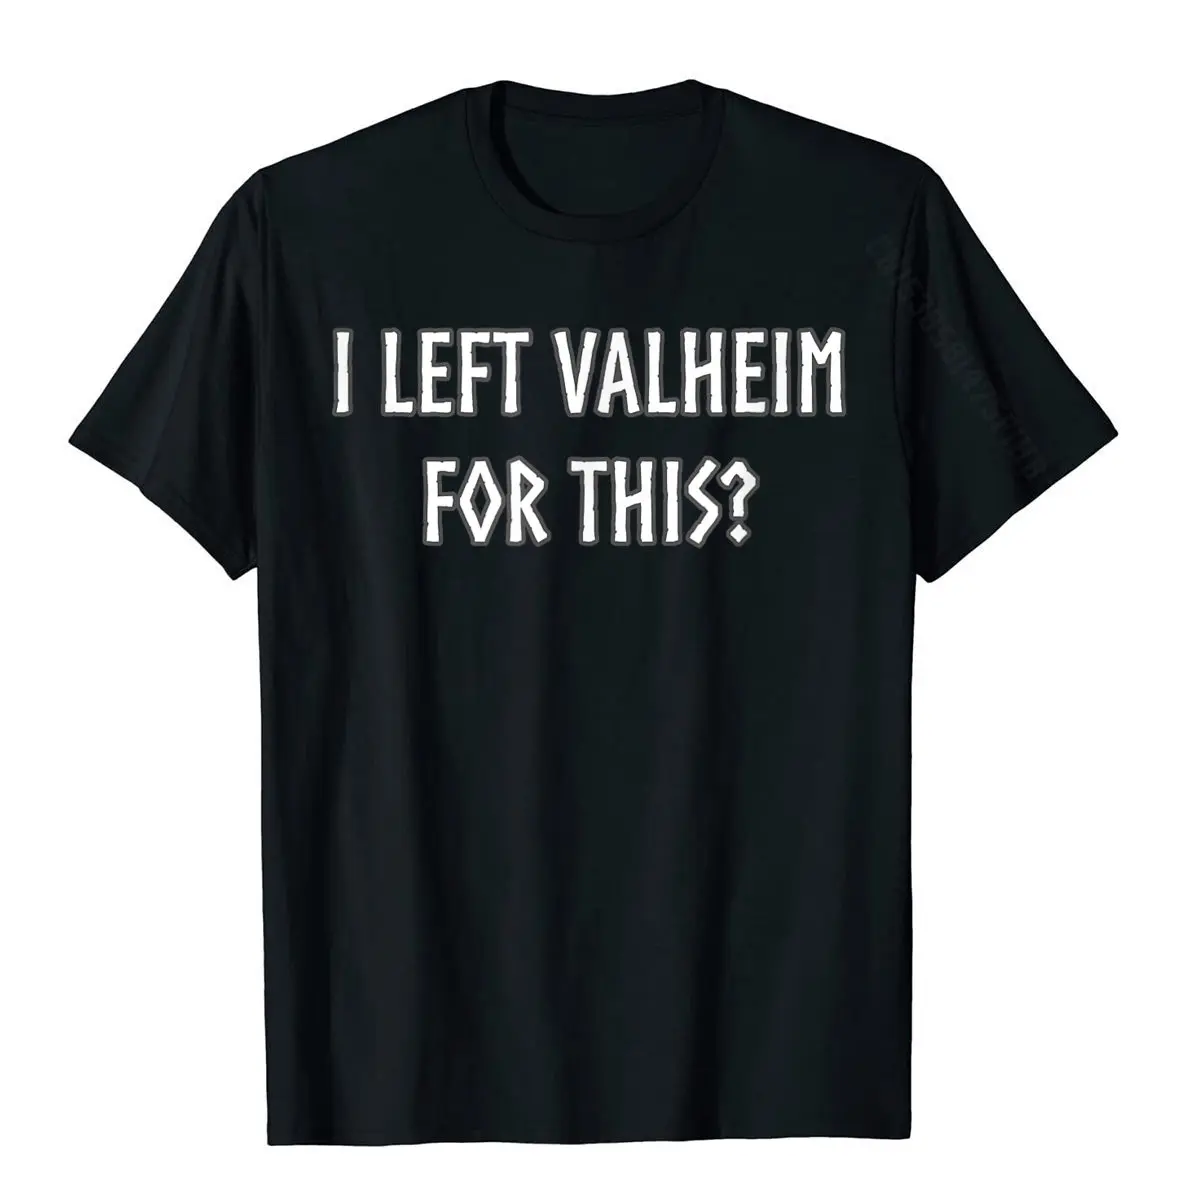 I Left Valheim For This? Gamer Inspired Viking Funny T-Shirt Cotton Customized Tops Tees Plain Men's Tshirts Casual